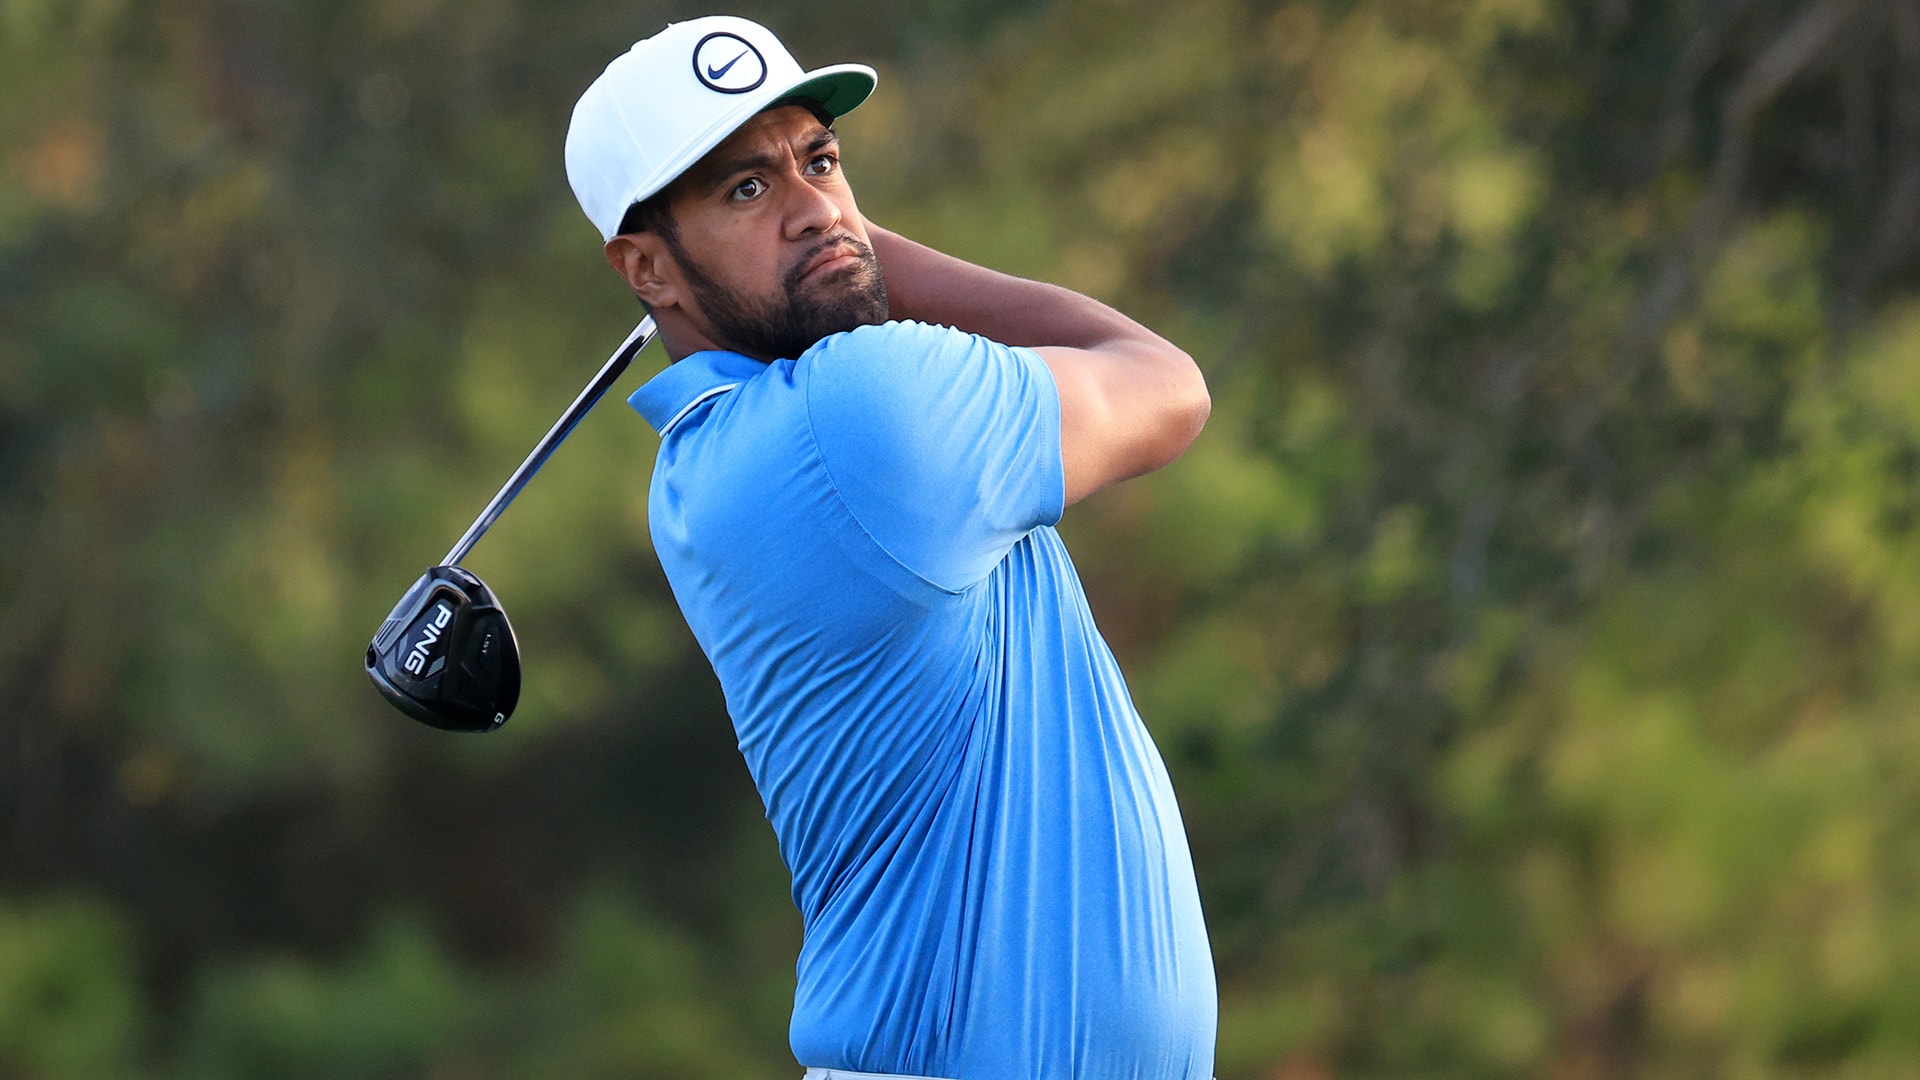 Days after winning Houston Open, Tony Finau WDs from RSM Classic with injury